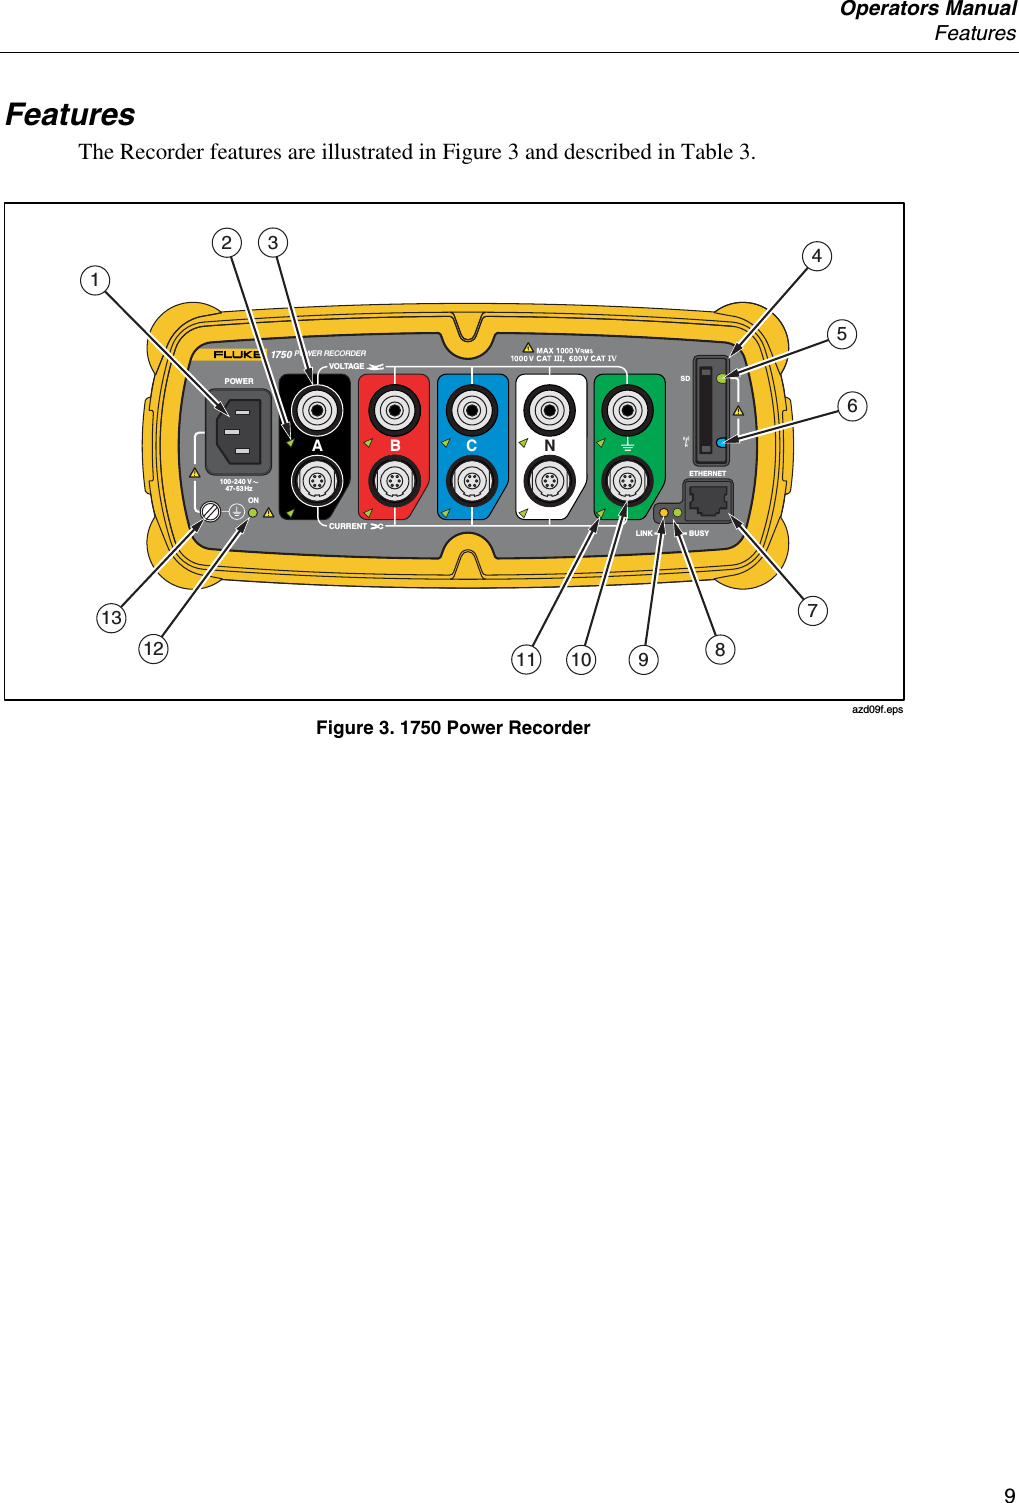  Operators Manual  Features     9 Features The Recorder features are illustrated in Figure 3 and described in Table 3. SDETHERNETPOWER1750 POWER RECORDERONBUSYLINK100-240 V   47-63HzBACNVO LTAGECURRENT41312311 10 8127569 azd09f.eps Figure 3. 1750 Power Recorder 